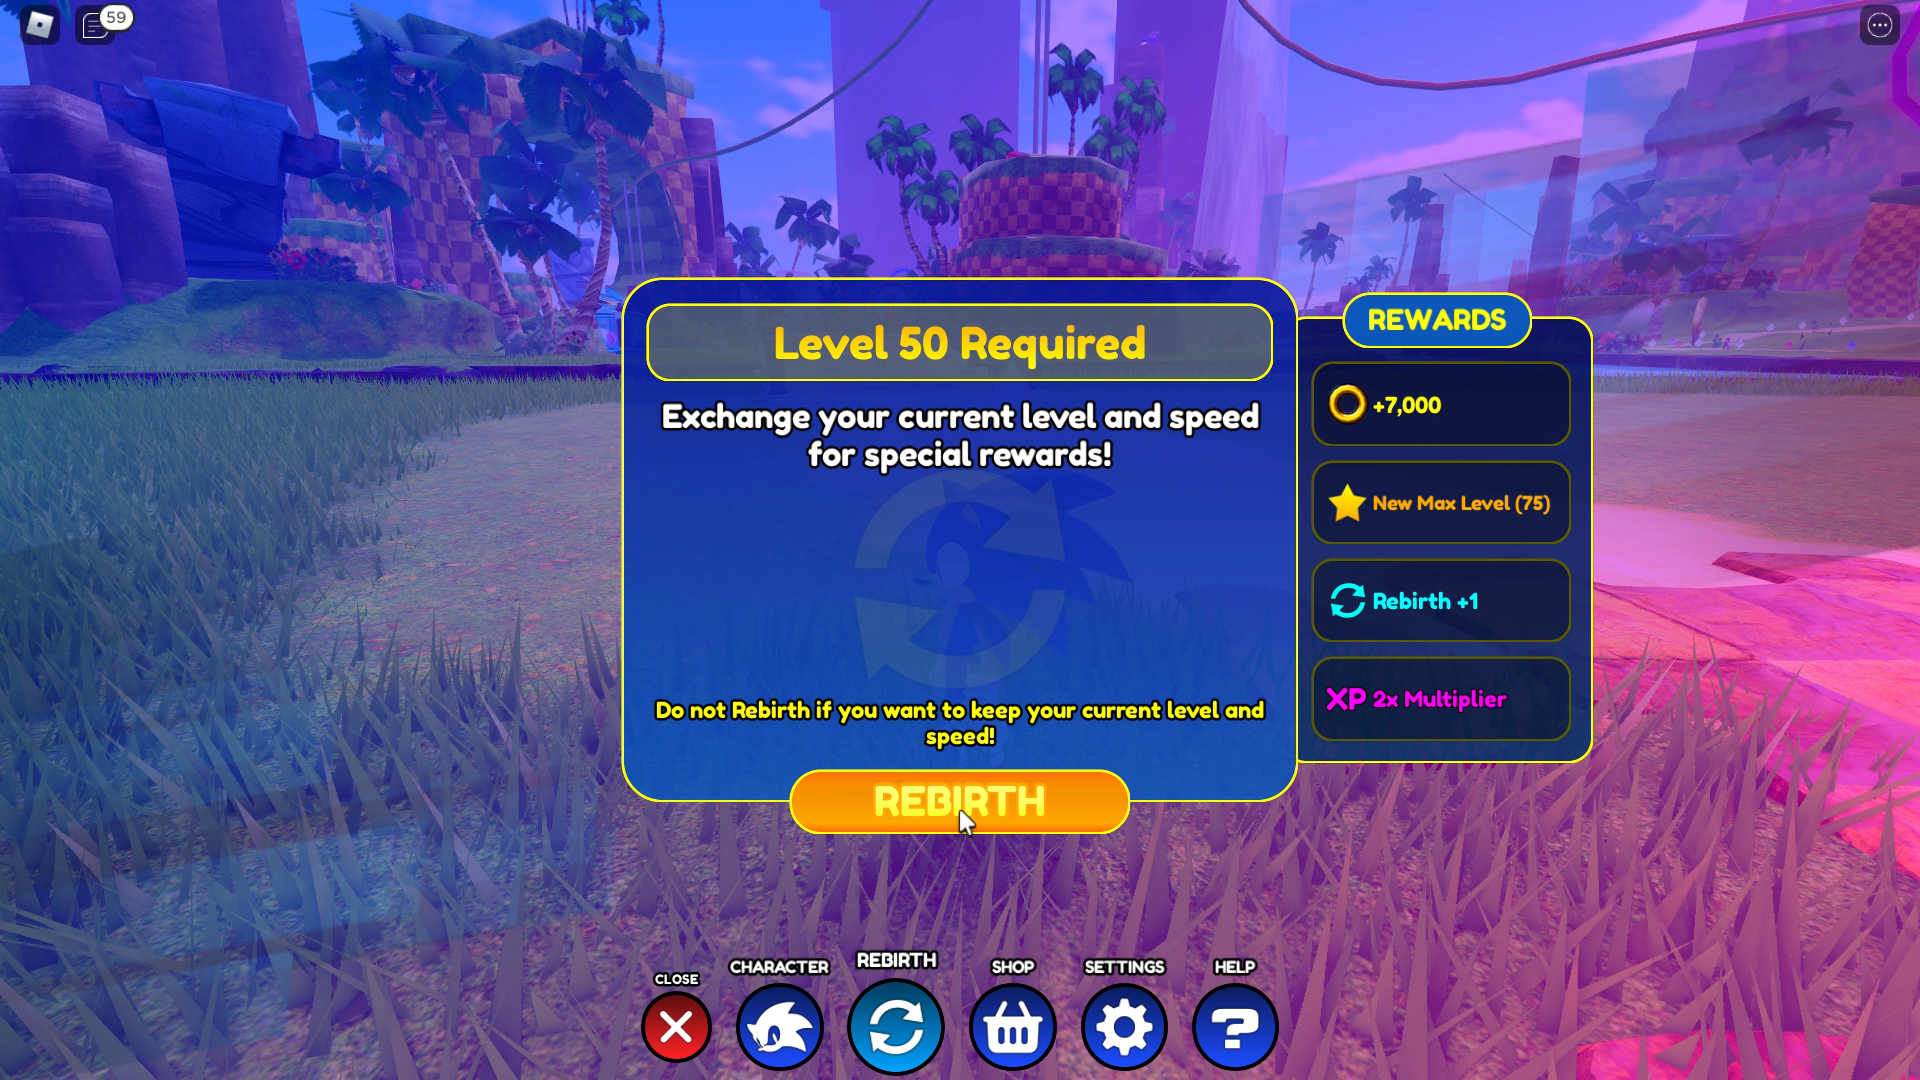 Sonic Speed Simulator review - a pop-up reading: "Level 50 Required. Exchange your current level and speed for special rewards!" with the option to click "Rebirth".